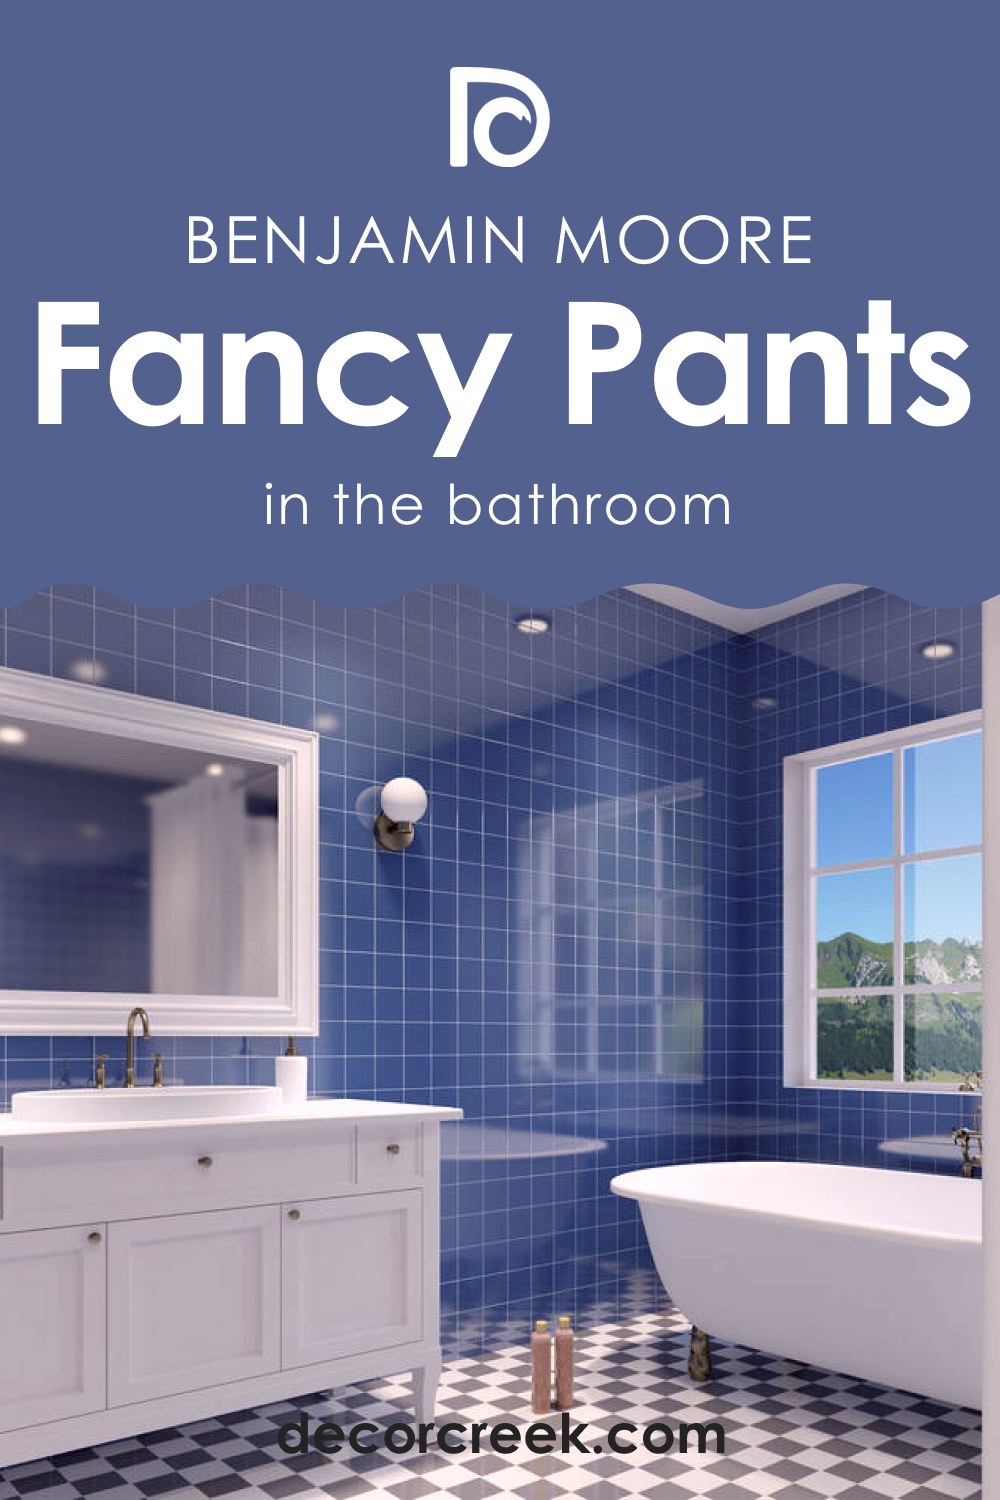 How to Use Fancy Pants CSP-525 in the Bathroom?